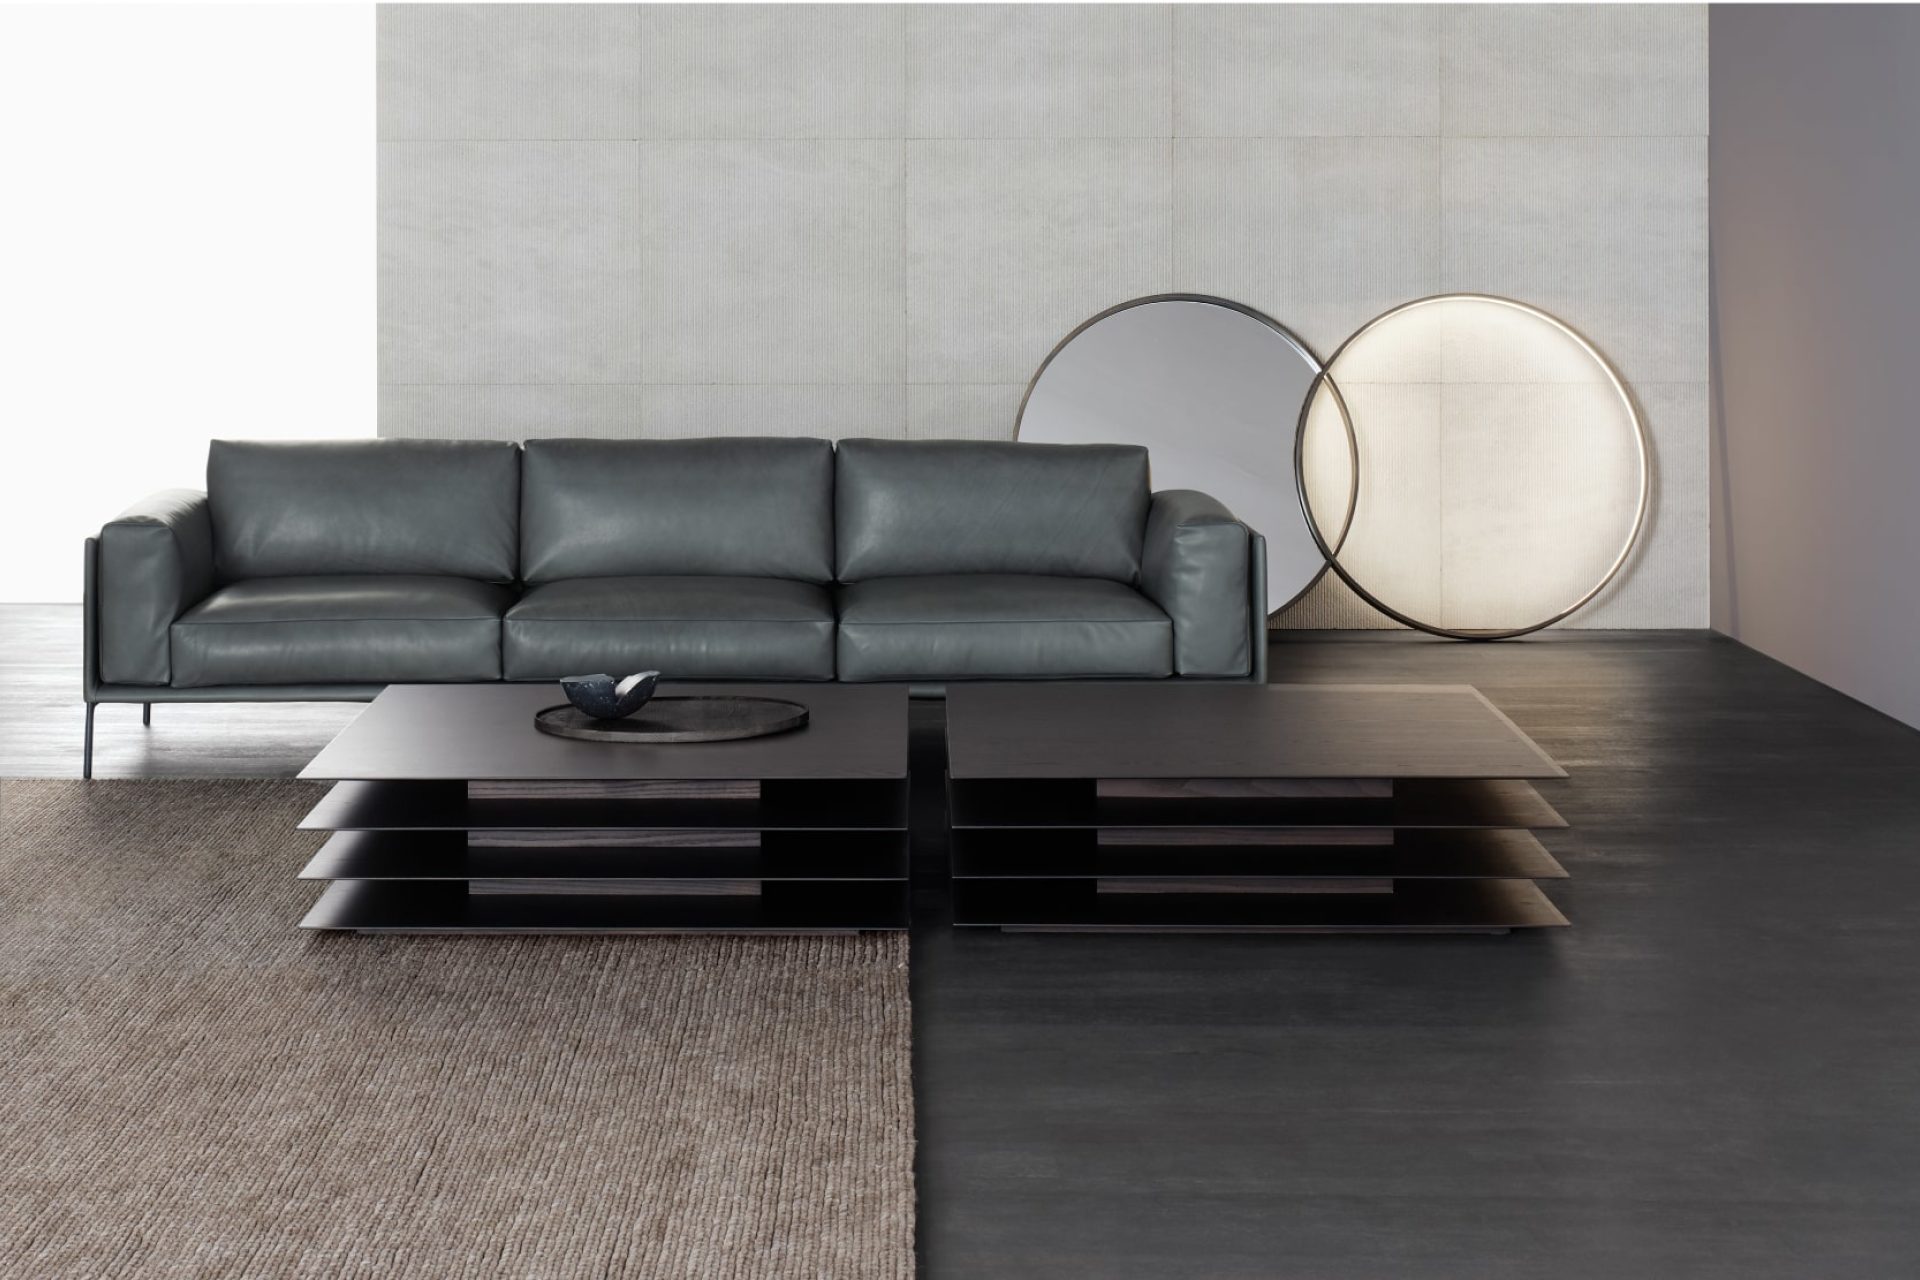 Three-seater grey leather sofa with a birch wood frame